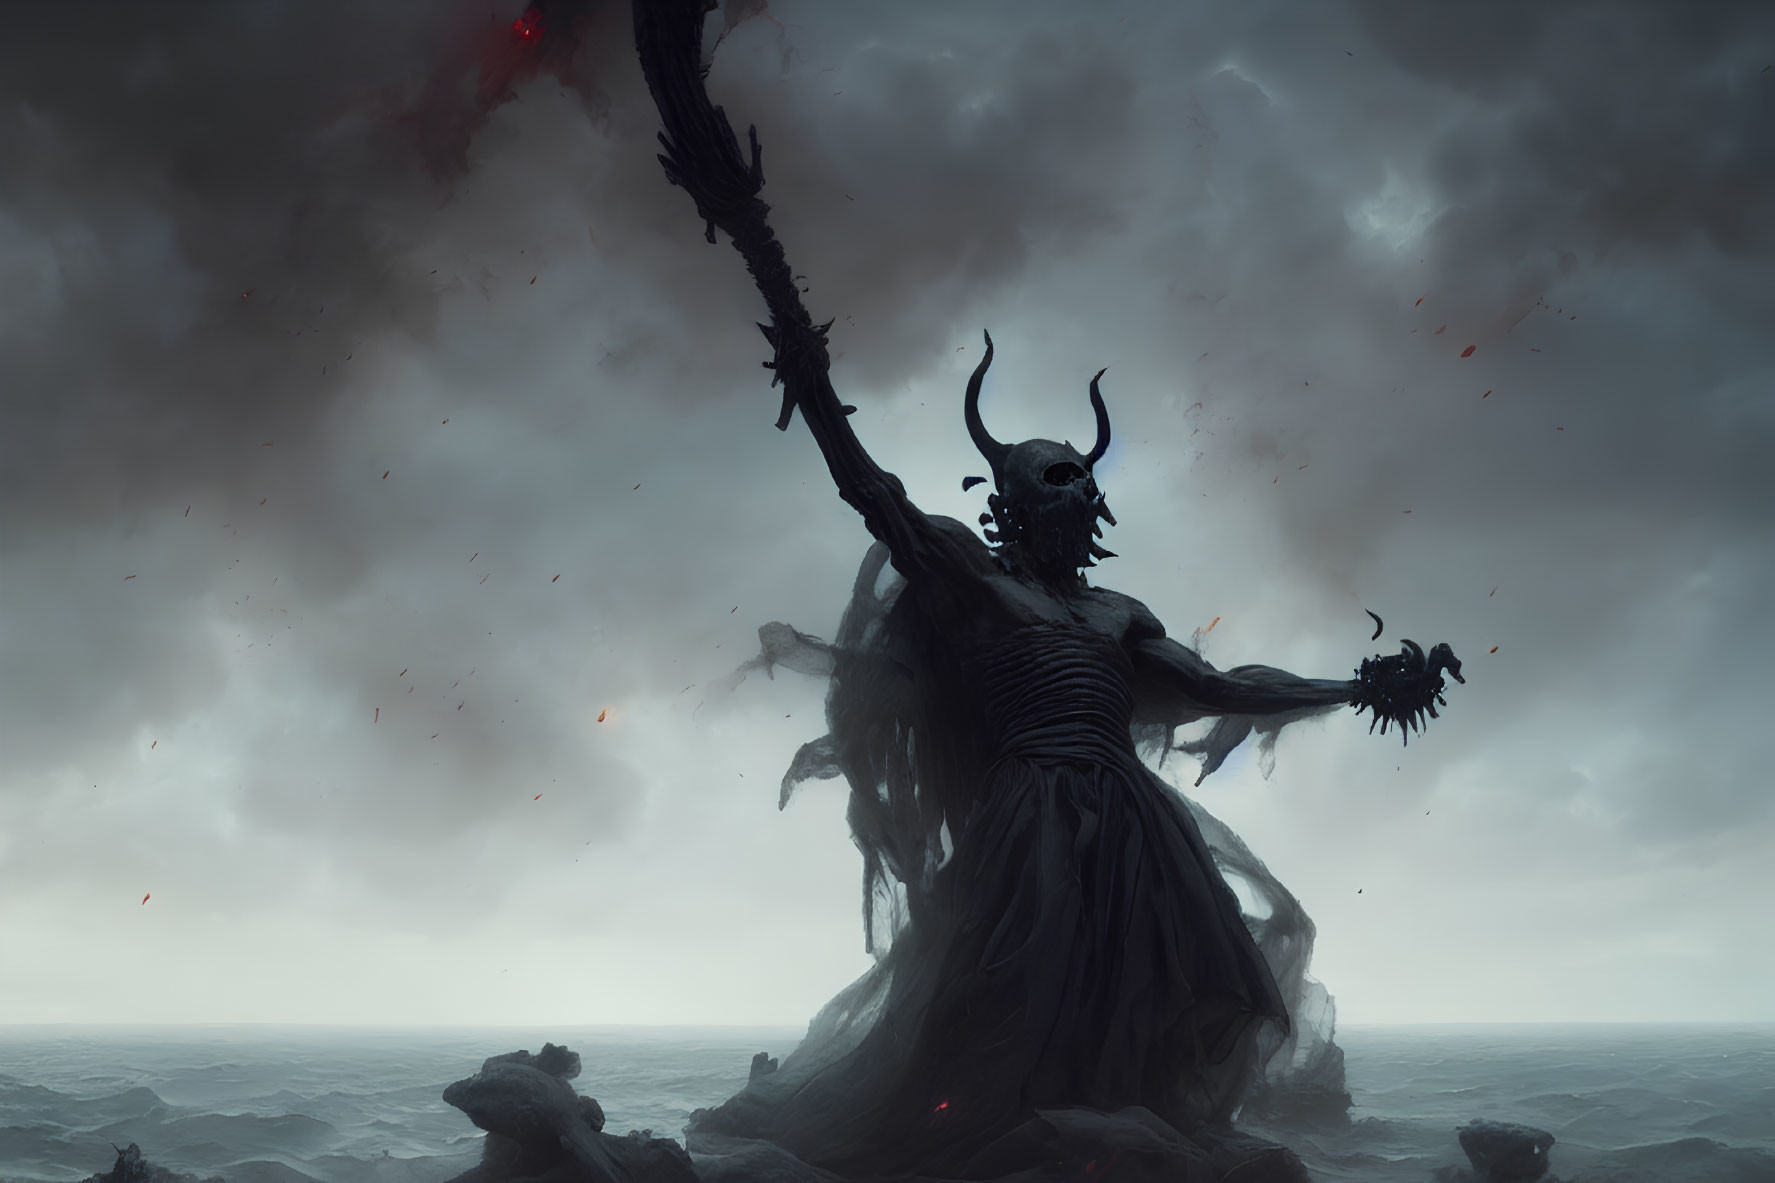 Dark figure with horns and red eyes in stormy seascape portrait.